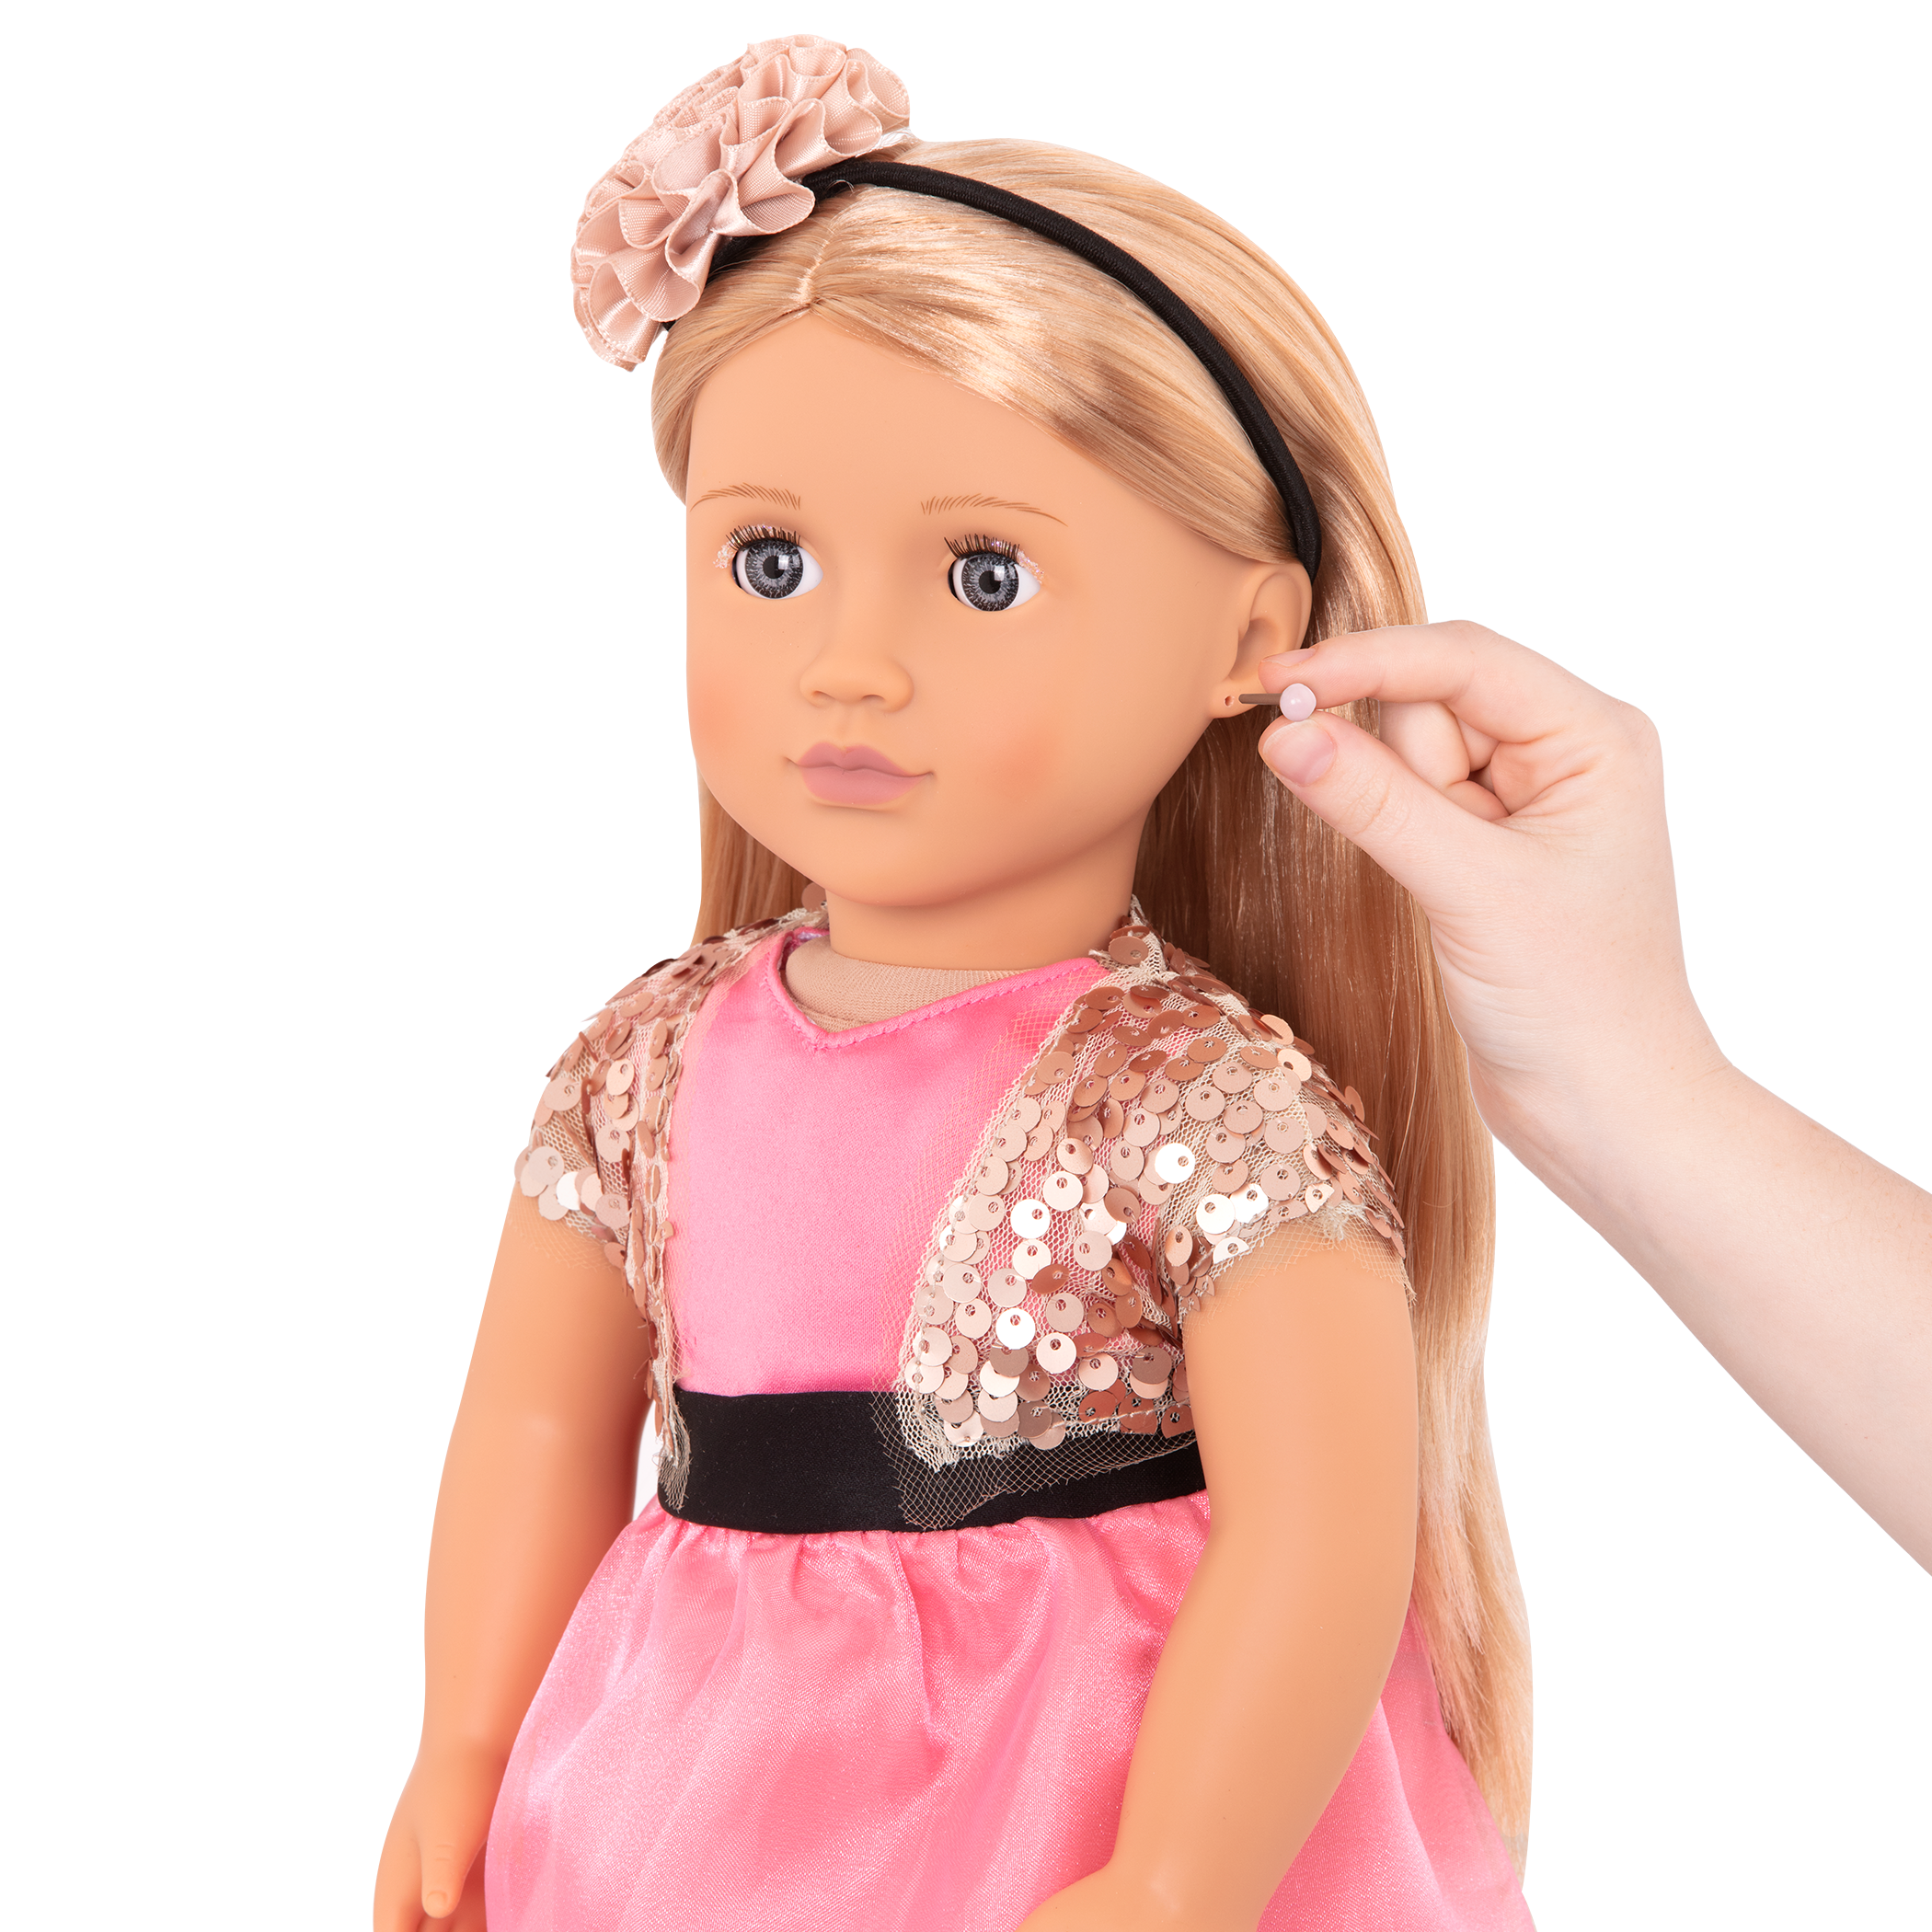 18-inch doll with blonde hair, gray eyes, jewelry and stand